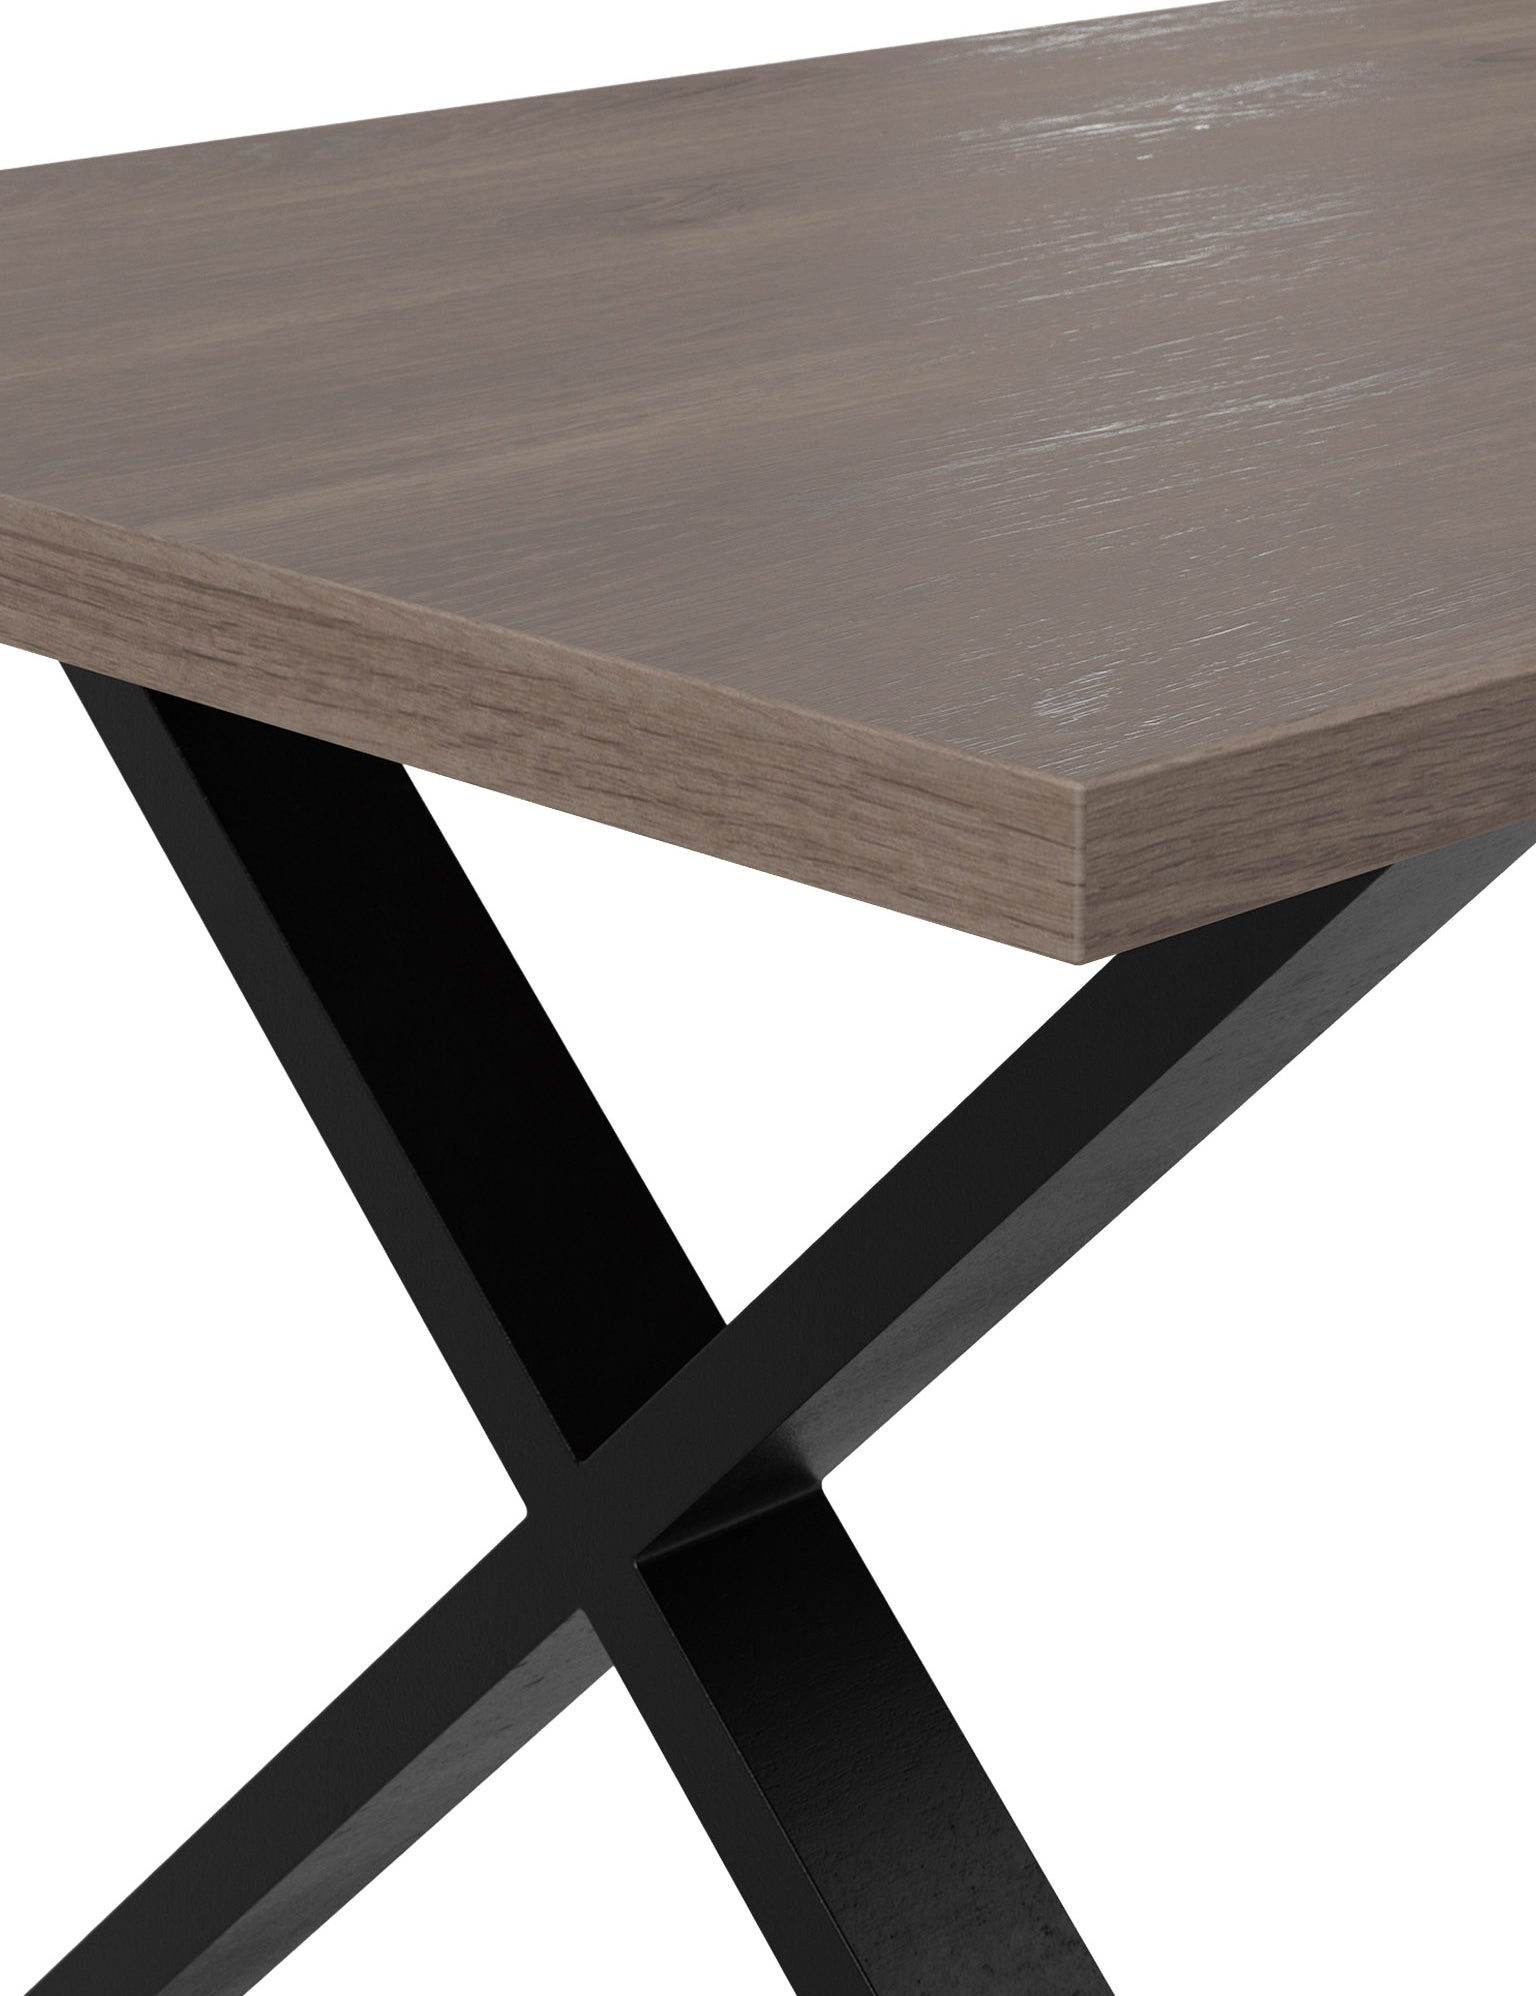 Rectangular Wooden Dining table with black metal legs